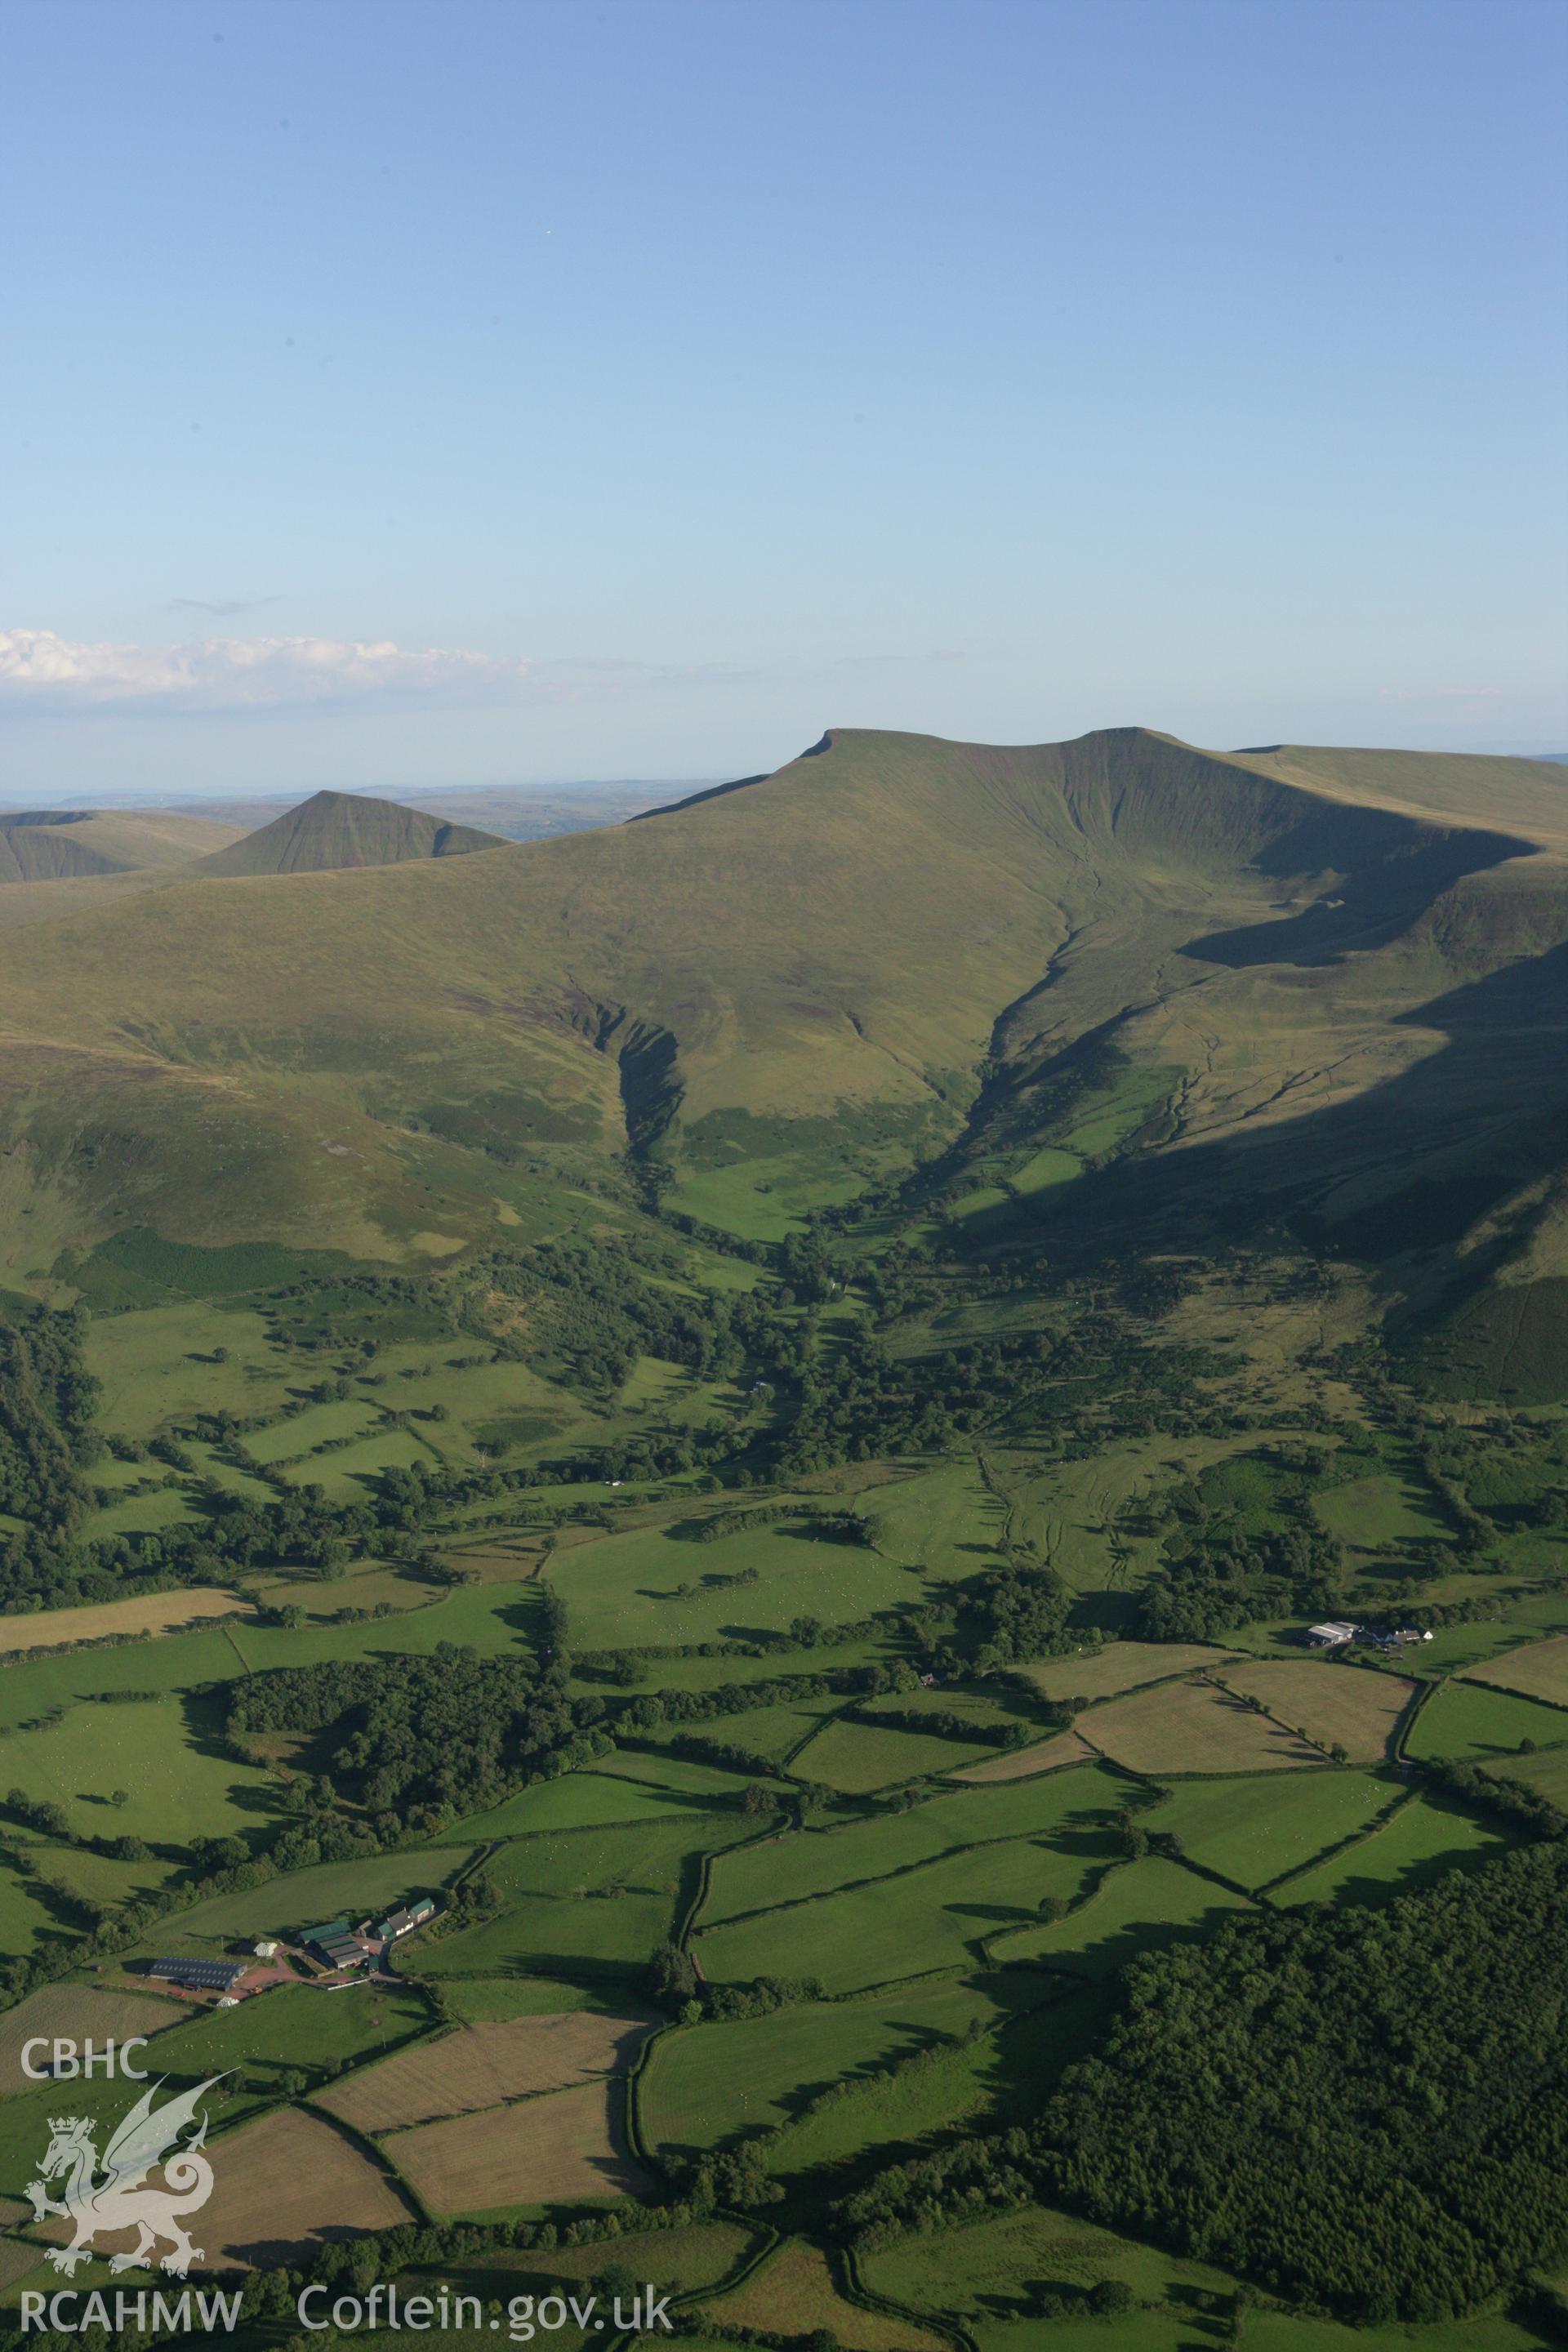 RCAHMW colour oblique aerial photograph of Corn Du and Pen y Fan, Brecon Beacons. Taken on 08 August 2007 by Toby Driver